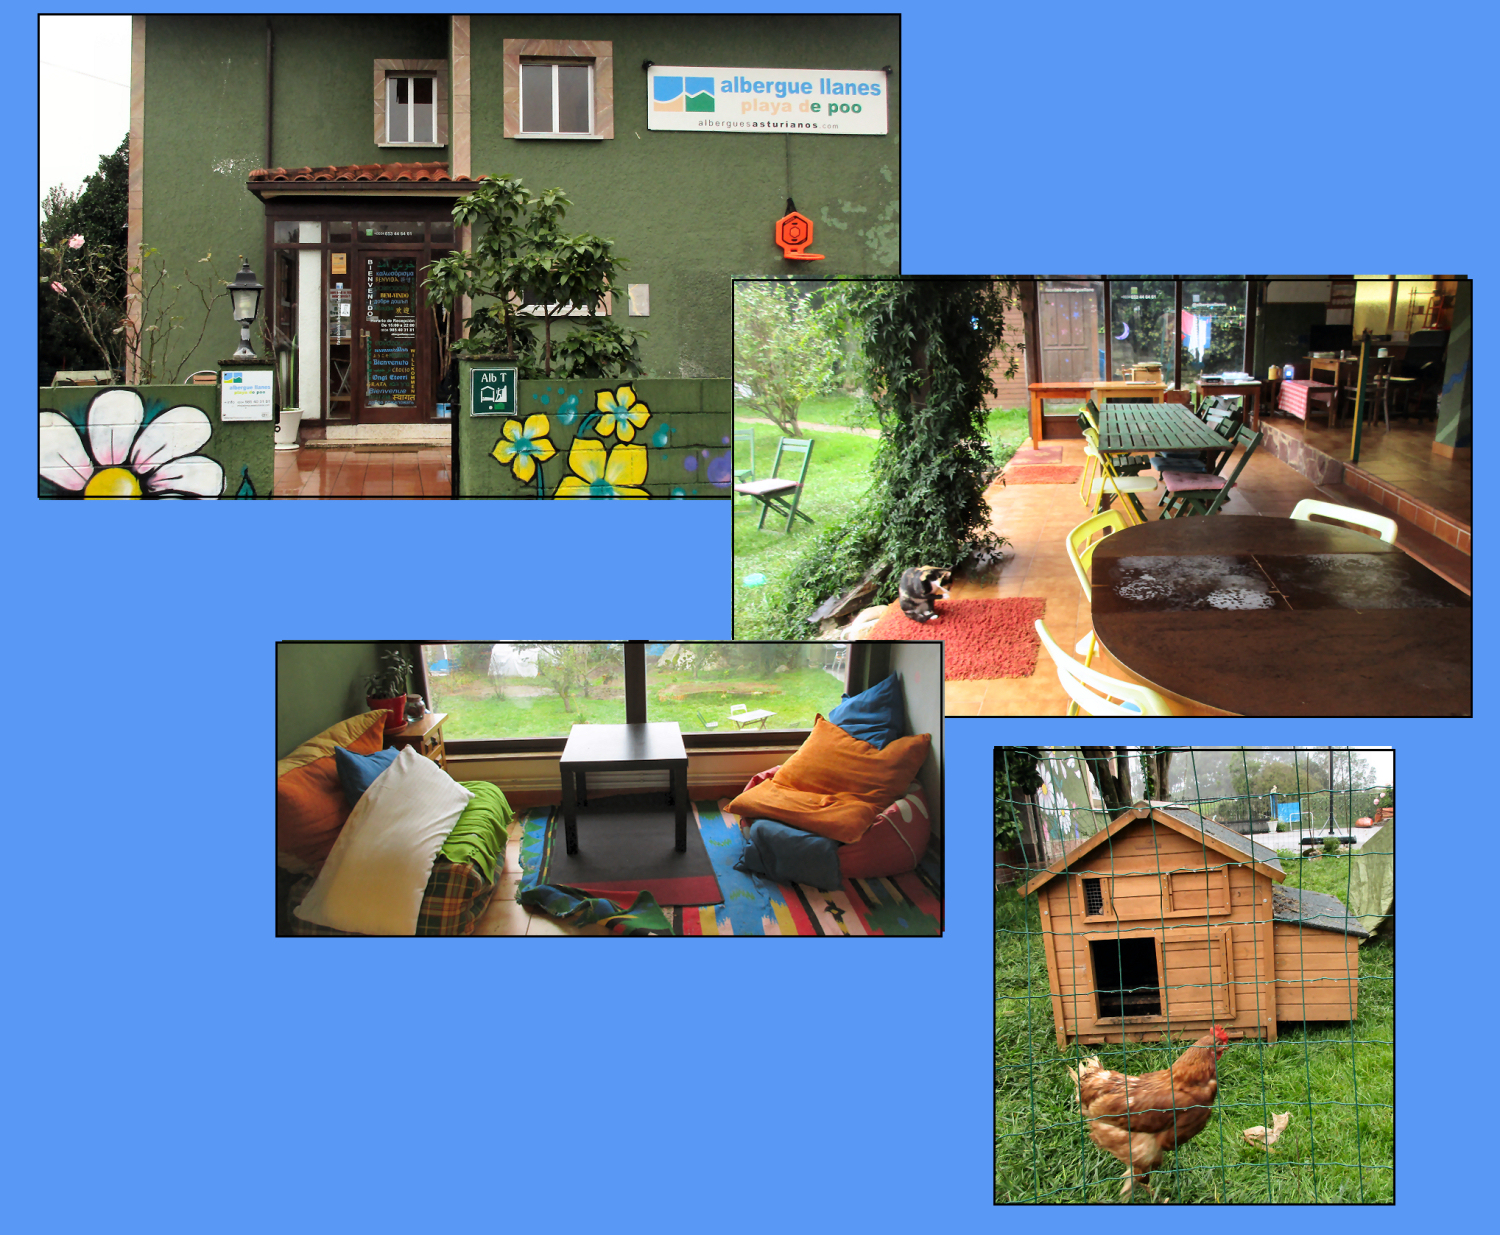 Images from Albergue Playa de Poo--chickens in the yard, comfortable rooms, nice patio